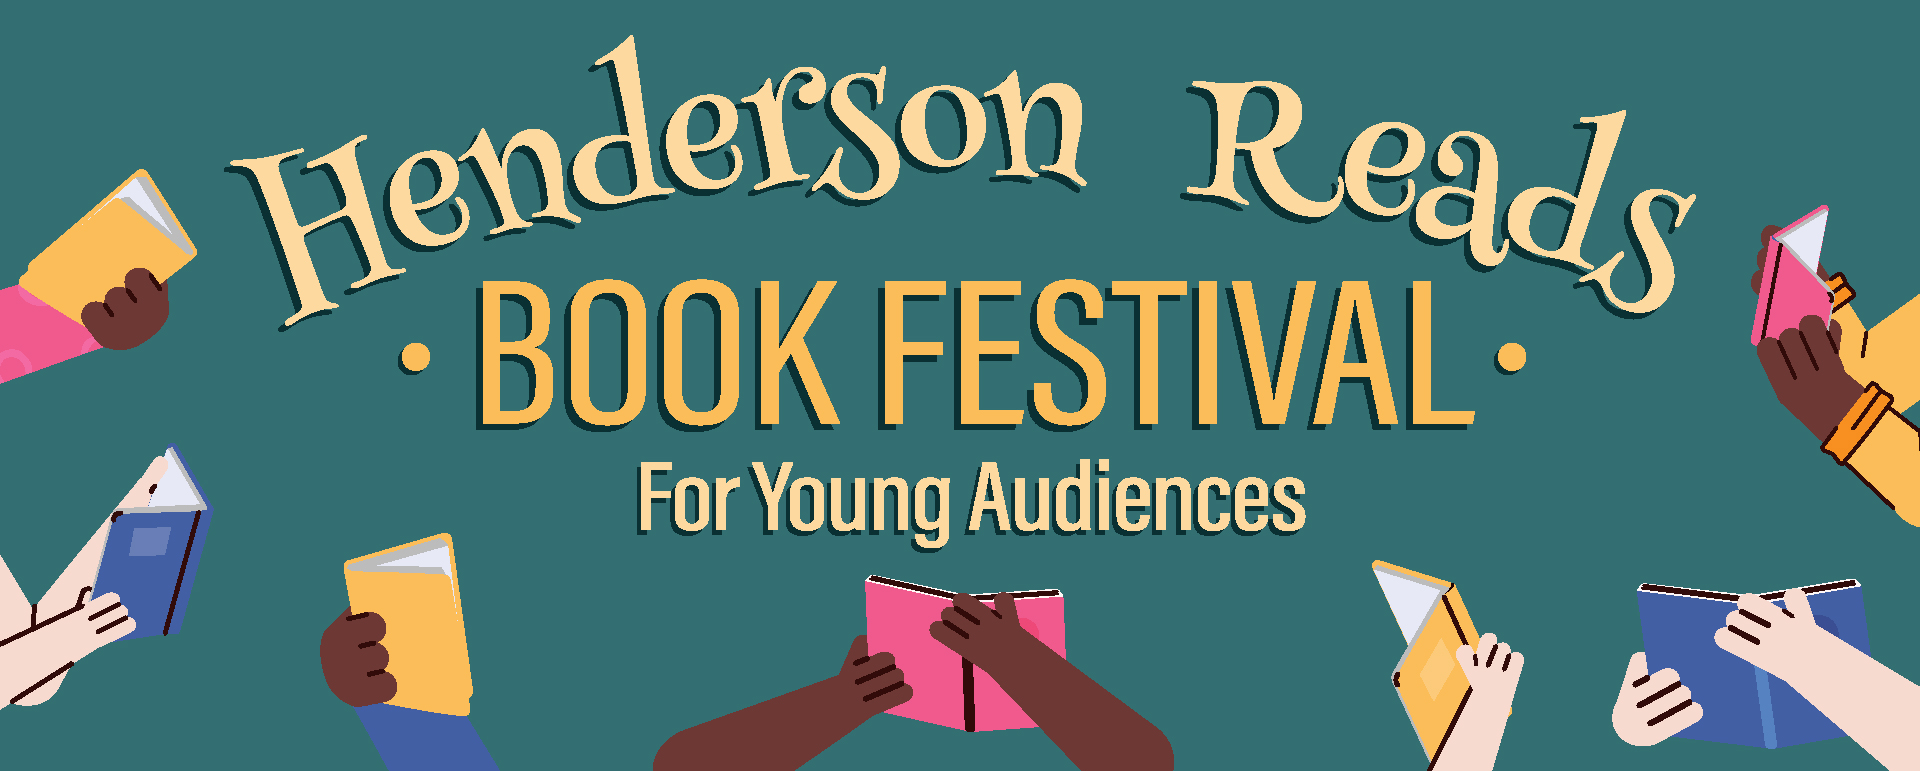 See you at the Henderson Reads Book Festival April 30th